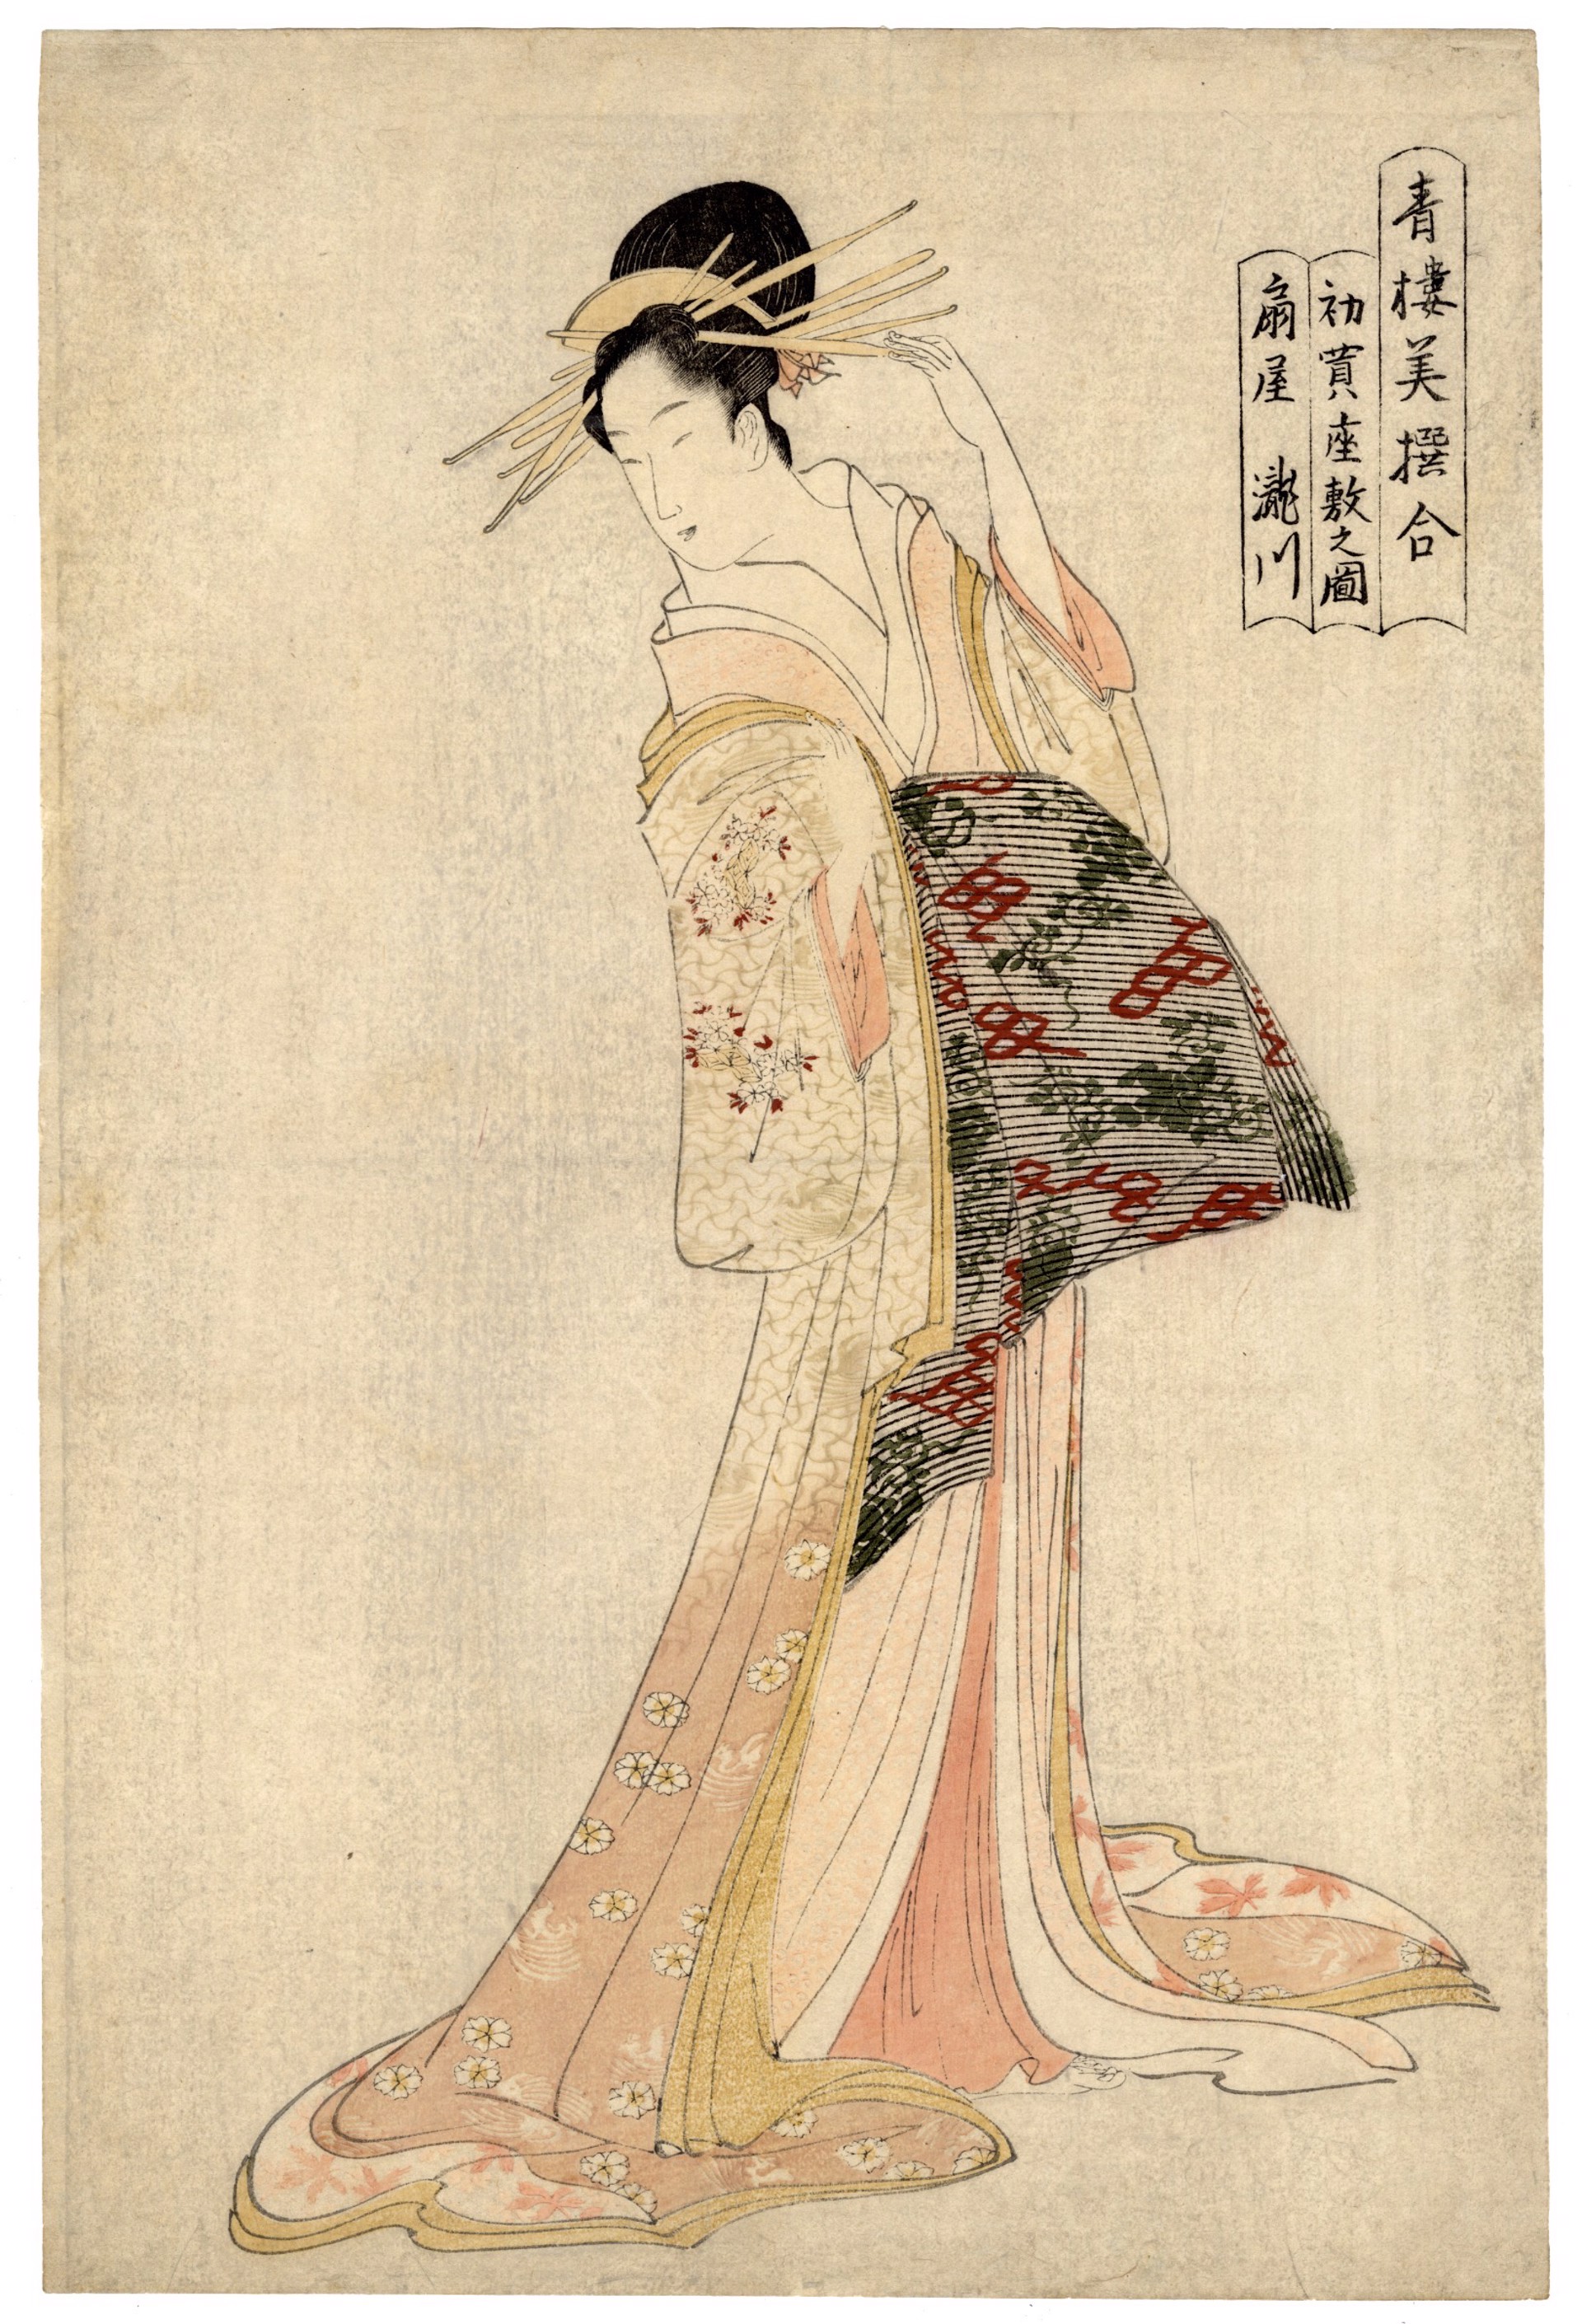 Takigawa of the Ogiya at the 1st Sale of the New Year by Eishi